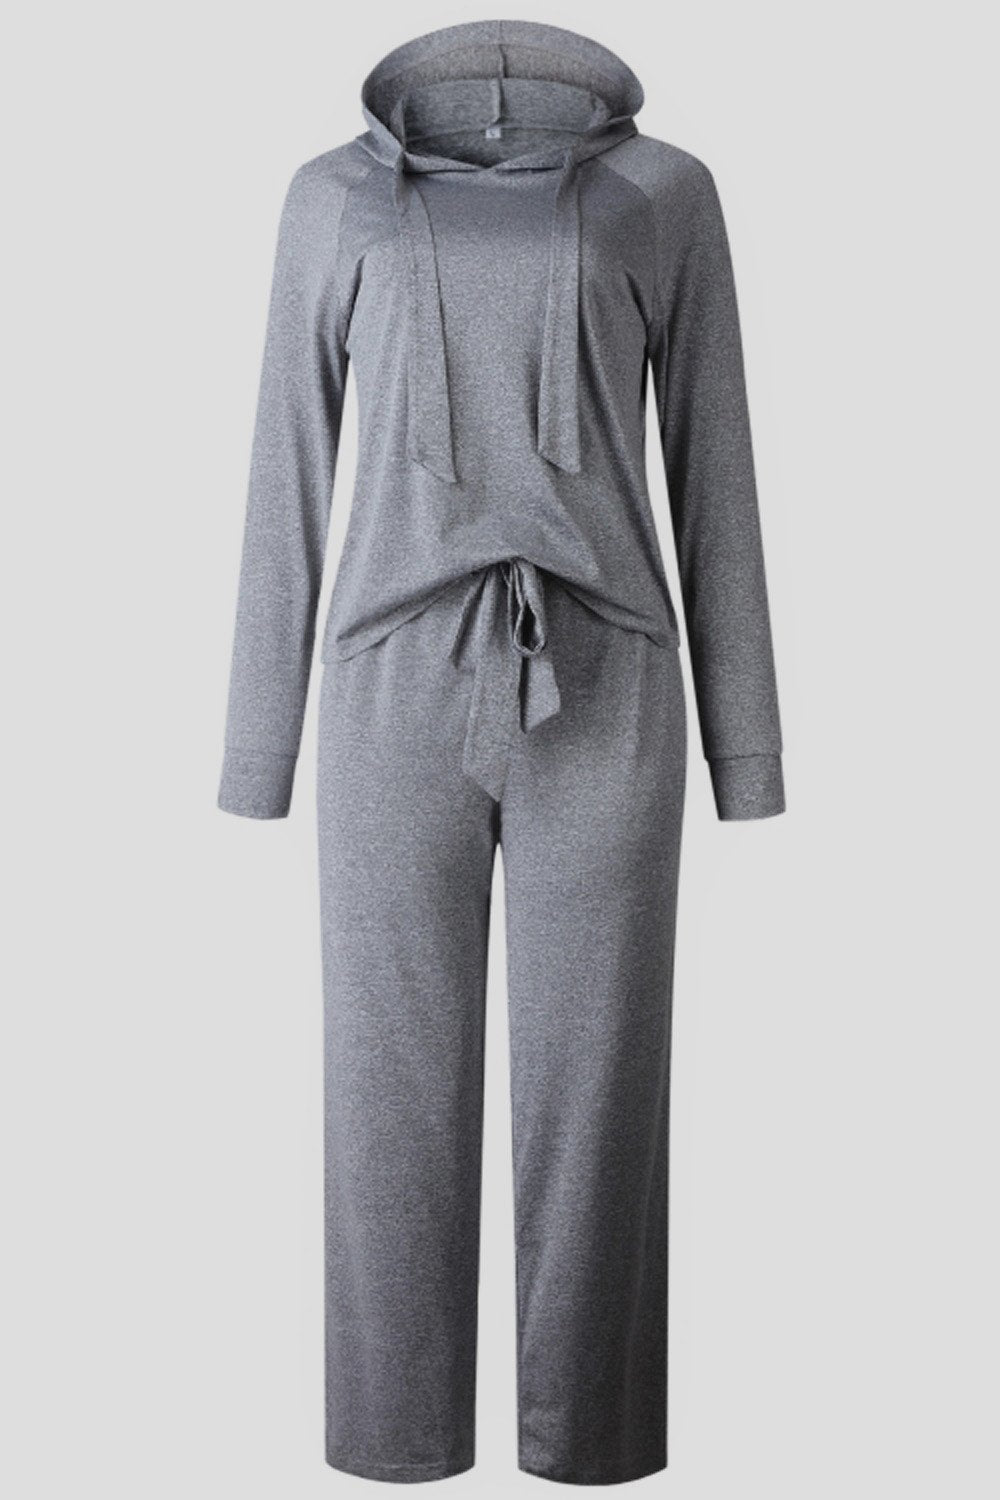 Plain Hooded Top And Pants Set - Pavacat